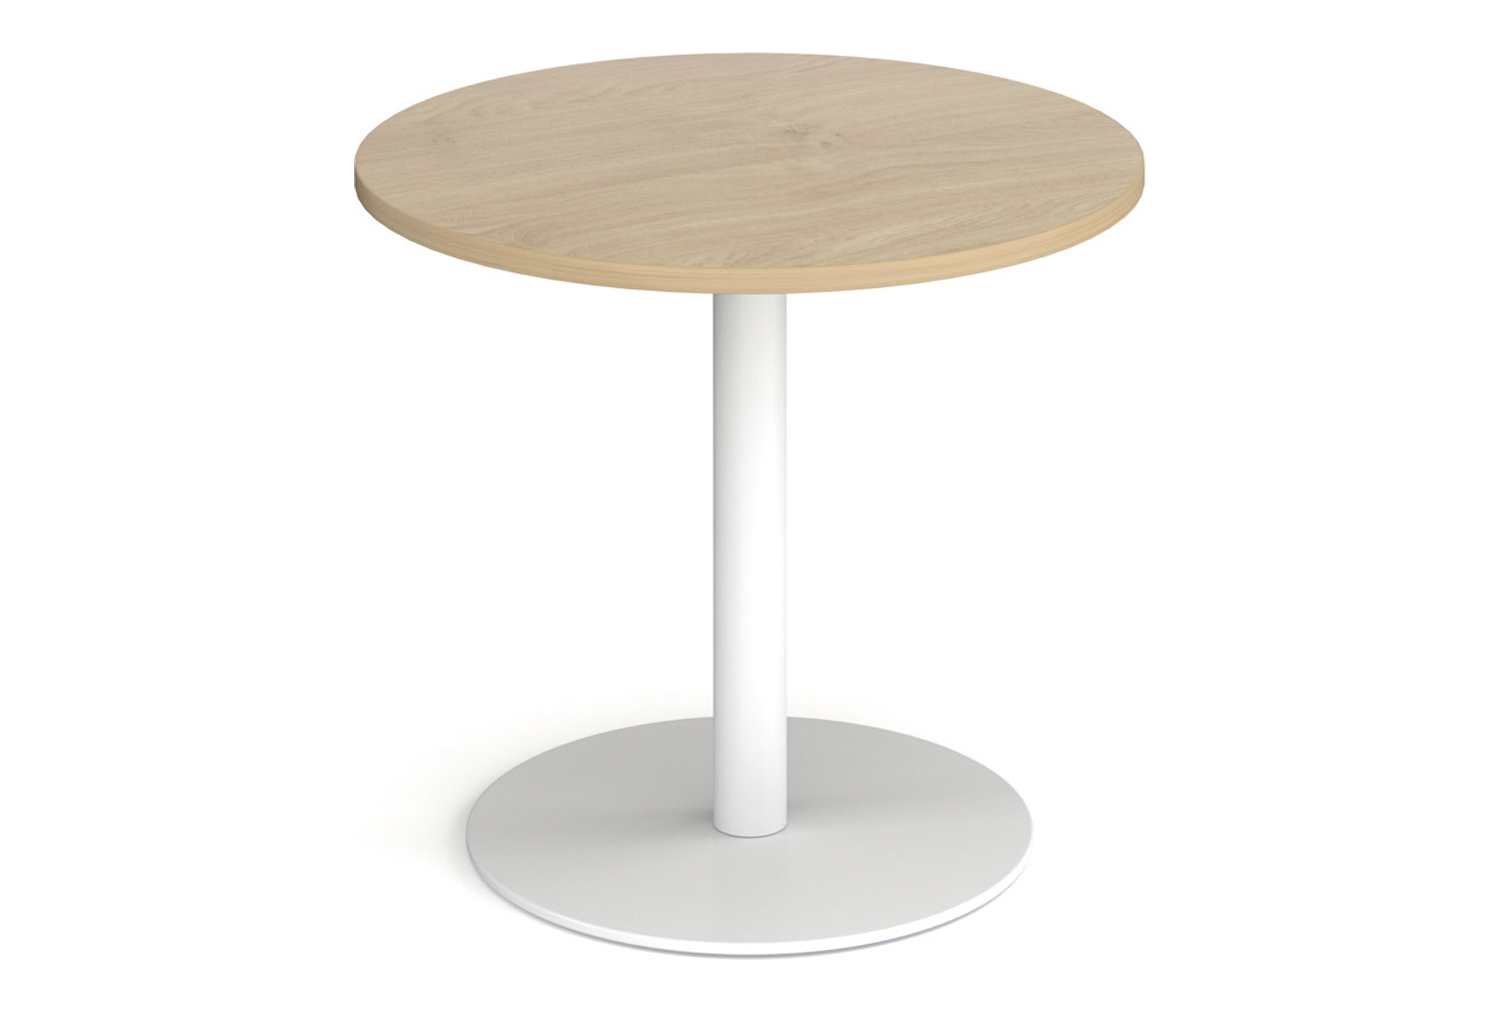 Tolson Circular Dining Table, 80diax73h (cm), Kendal Oak, Express Delivery